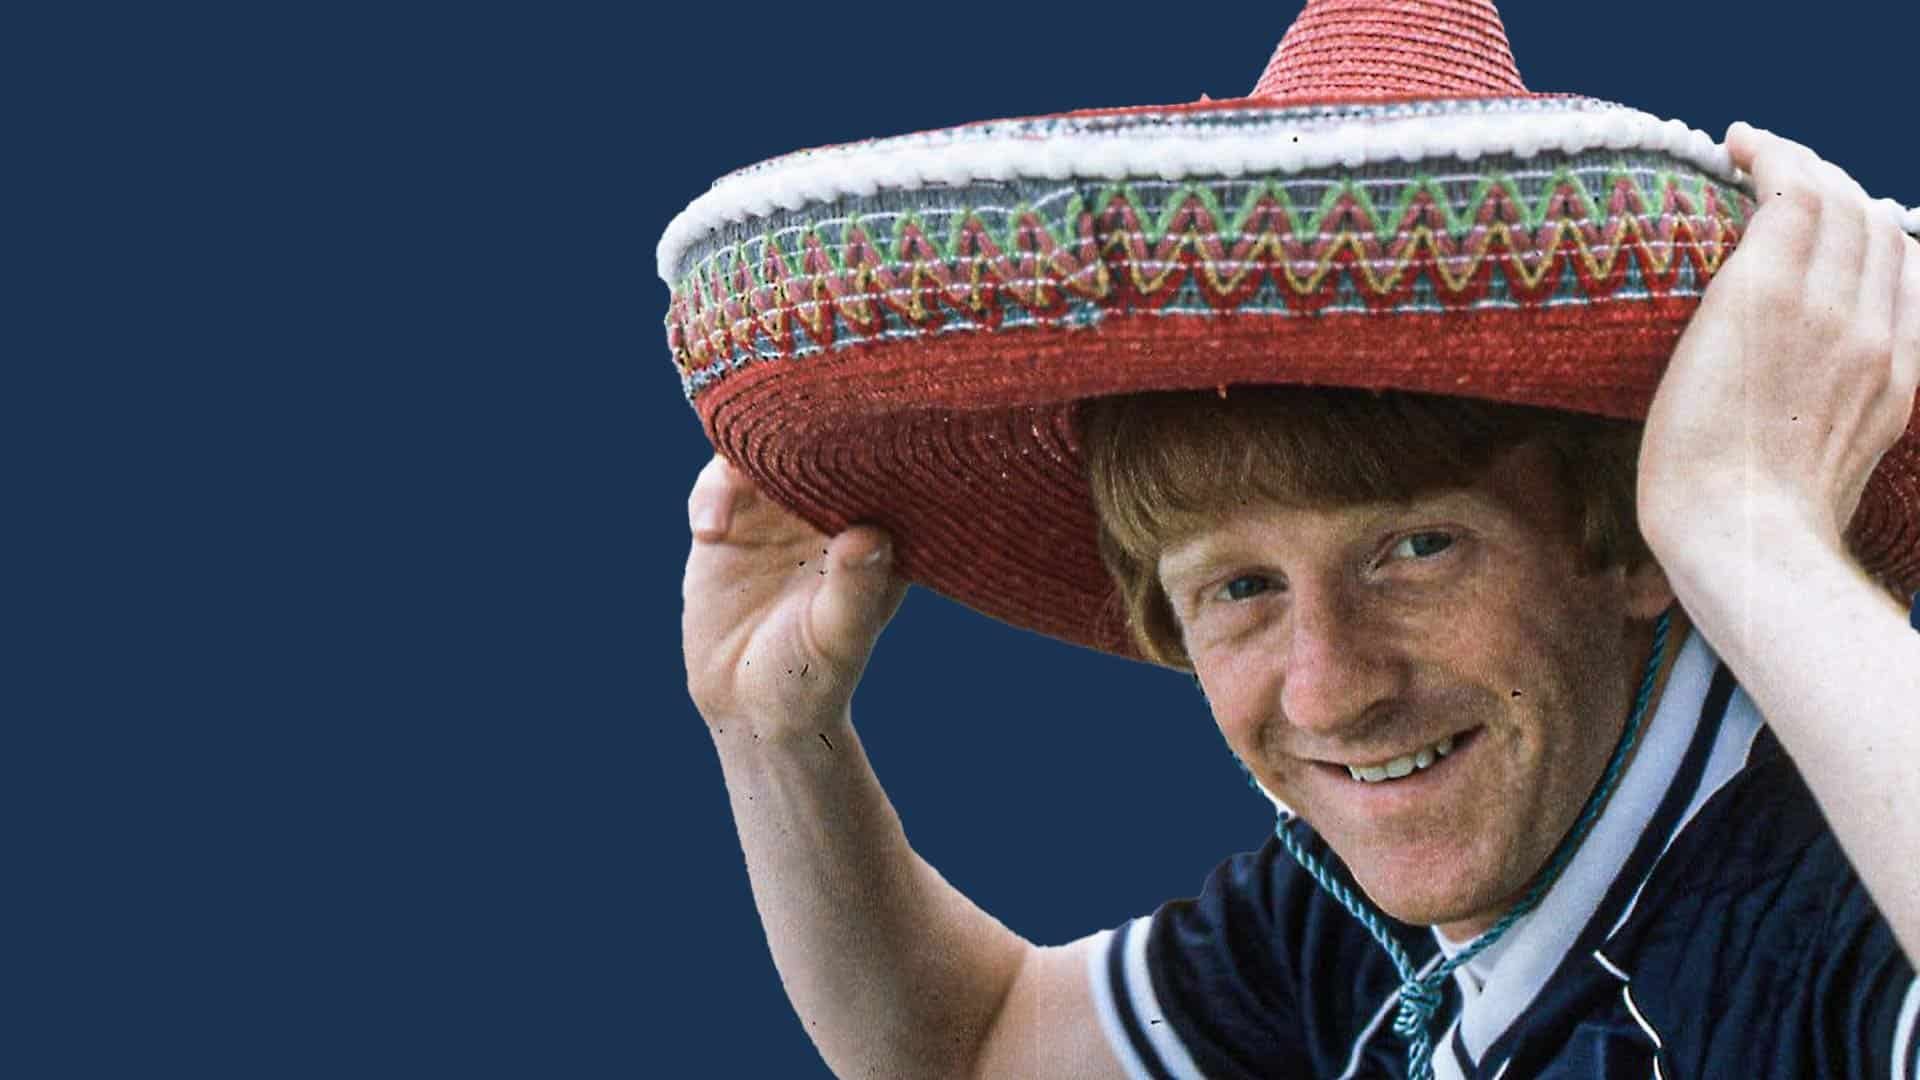 Gordon Strachan wearing a sombrero at the 1986 World Cup in Mexico. It's as good as you imagine